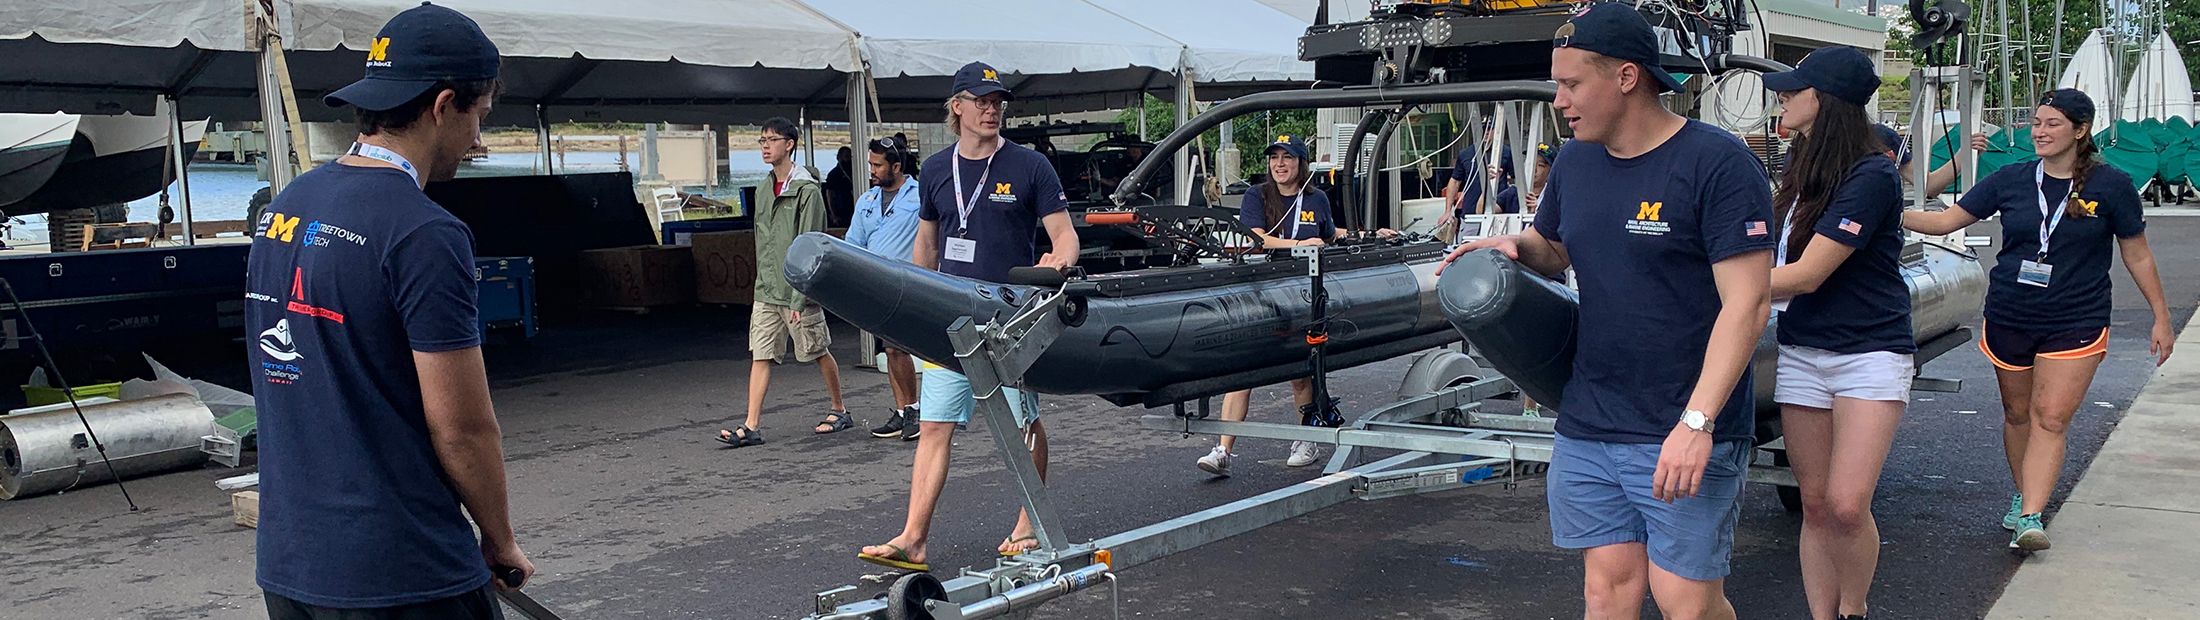 The Michigan RobotX team competed in the 2018 Maritime RobotX Challenge in Honolulu on Dec. 8-15. Photo: Michigan RobotX